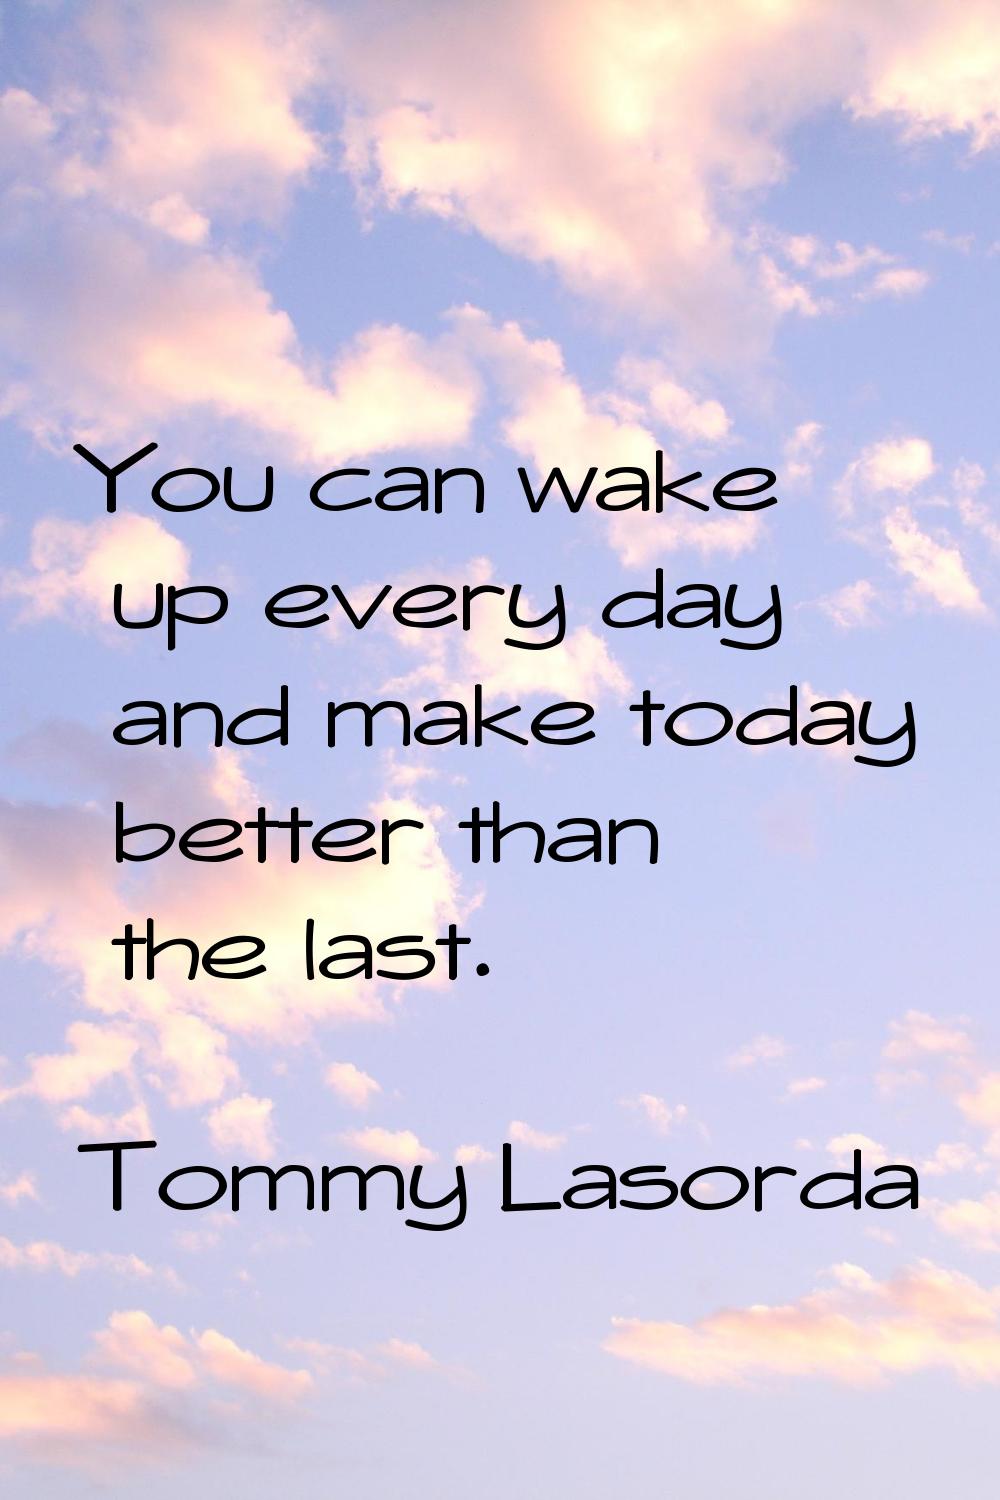 You can wake up every day and make today better than the last.